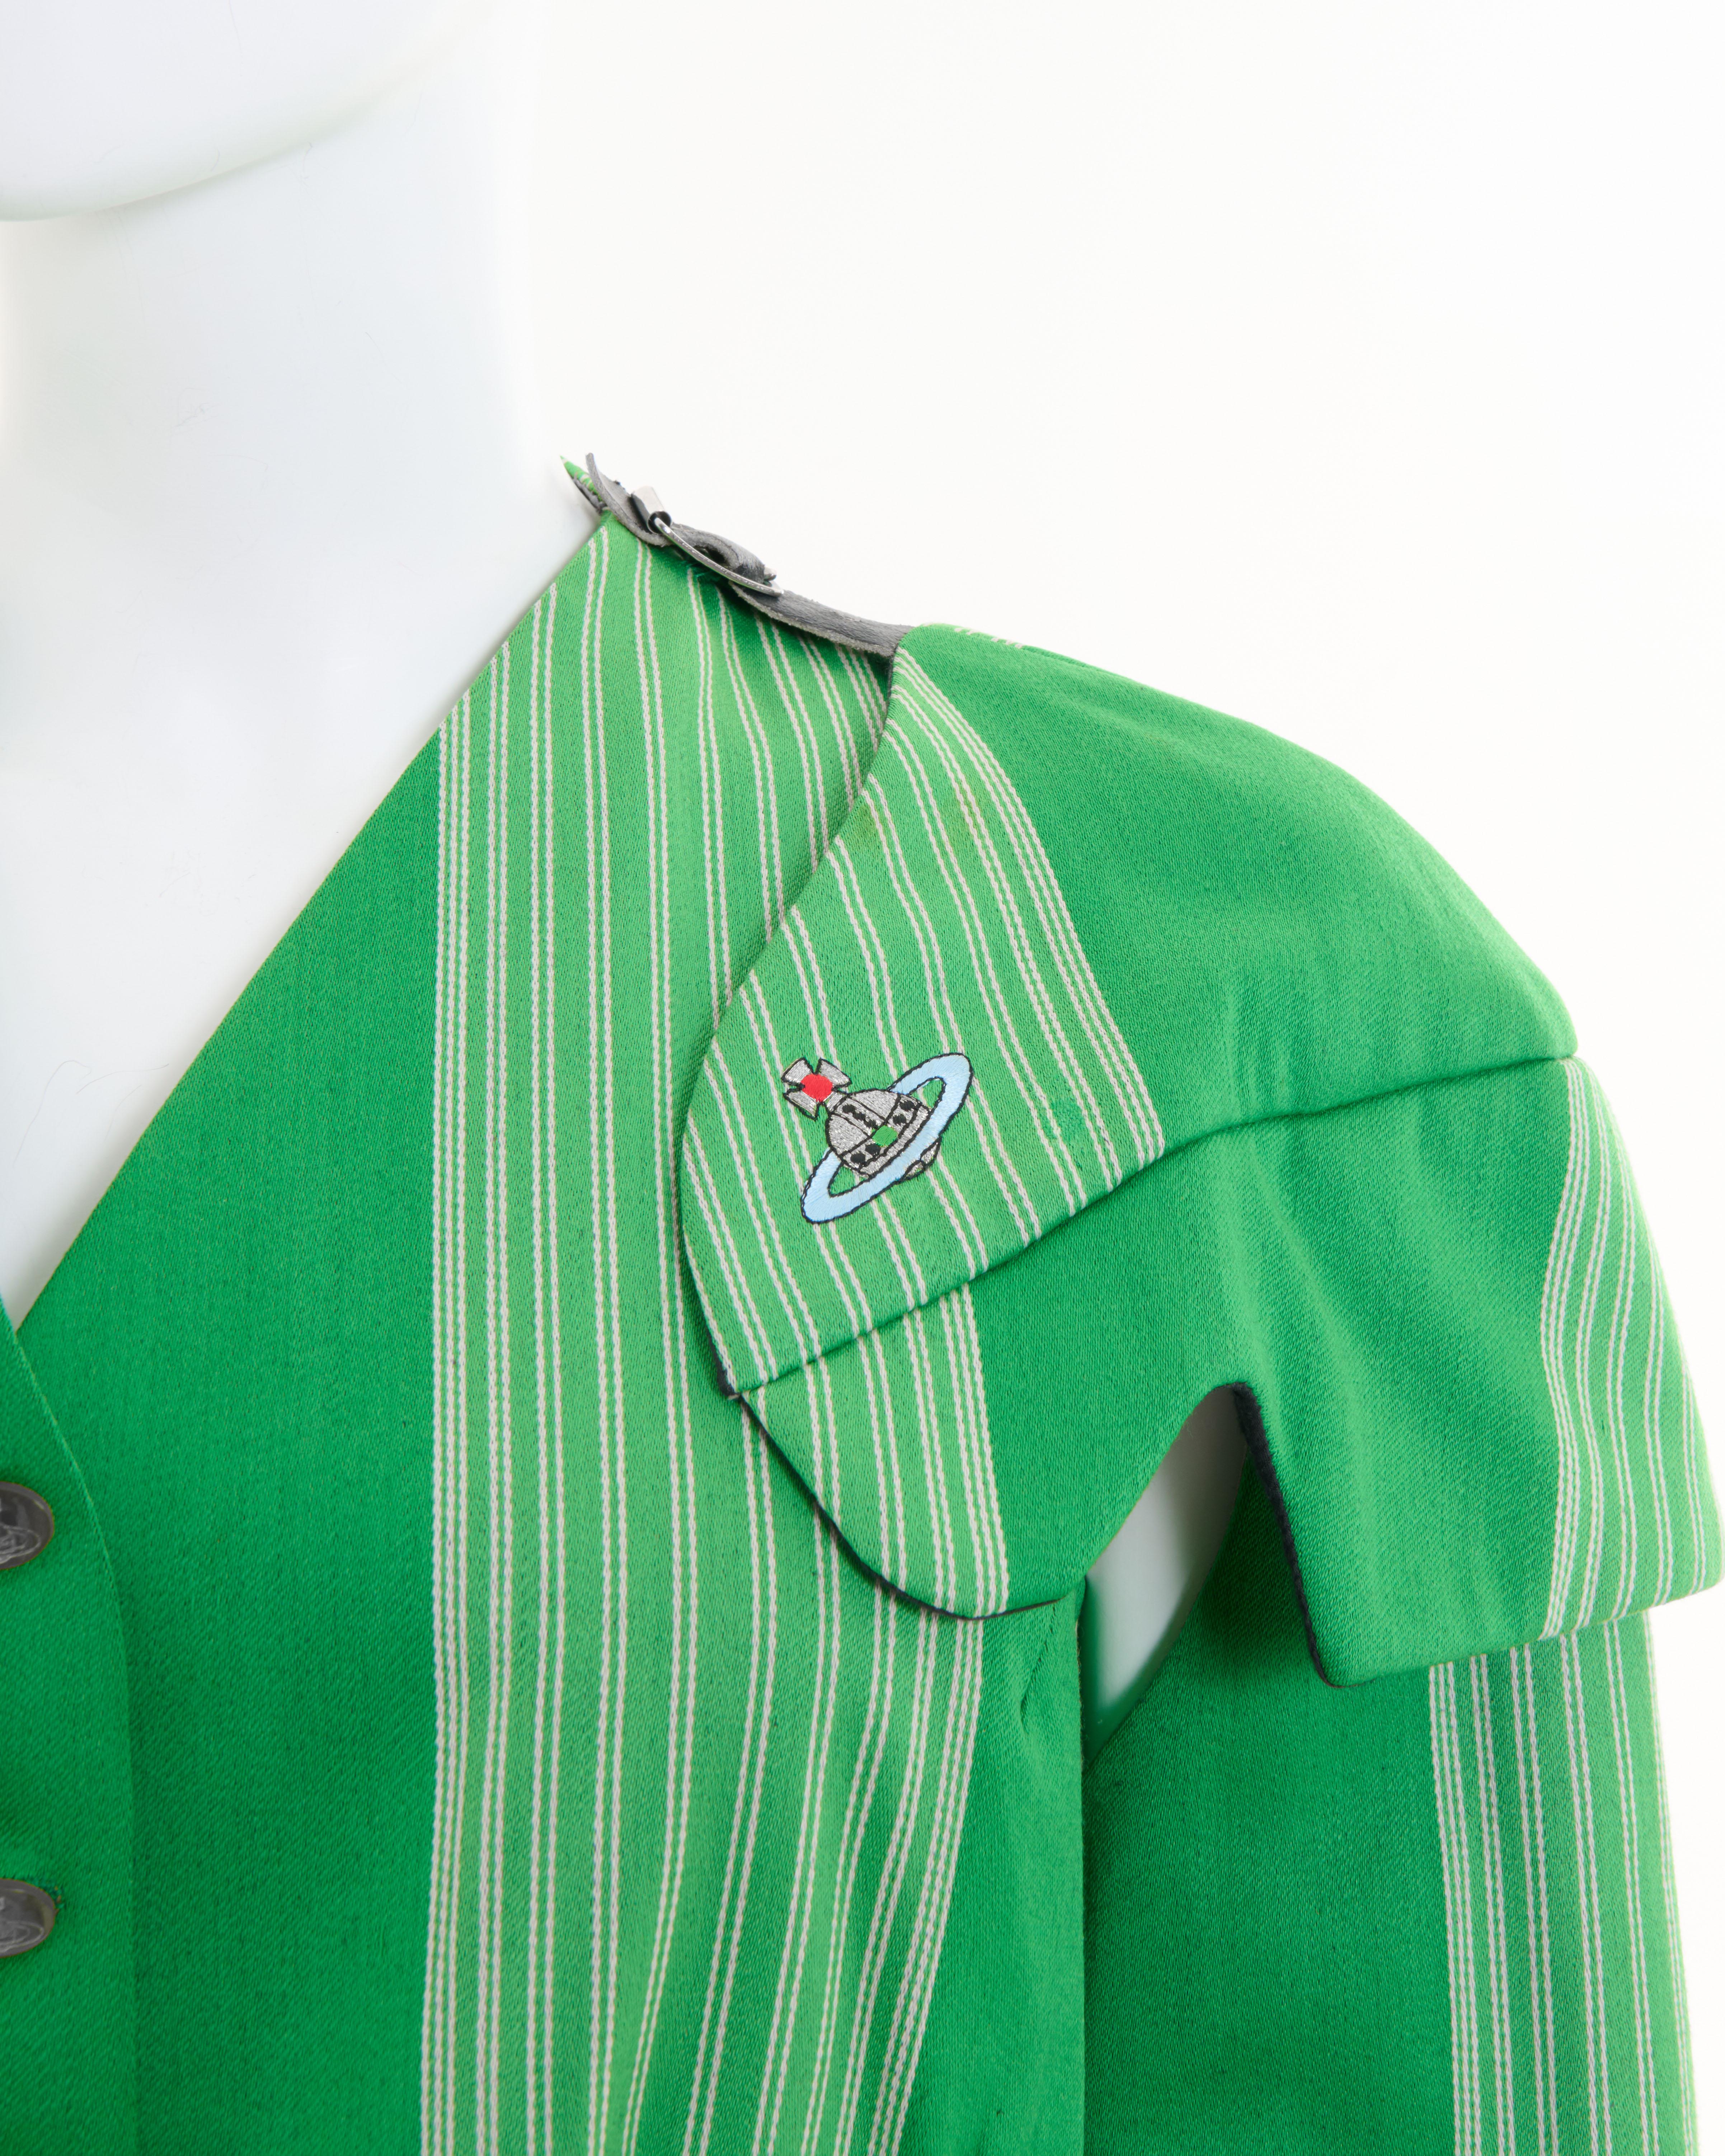 Vivienne Westwood  F/W 1988/89 ‘Time Machine’ Green striped Armour jacket For Sale 8